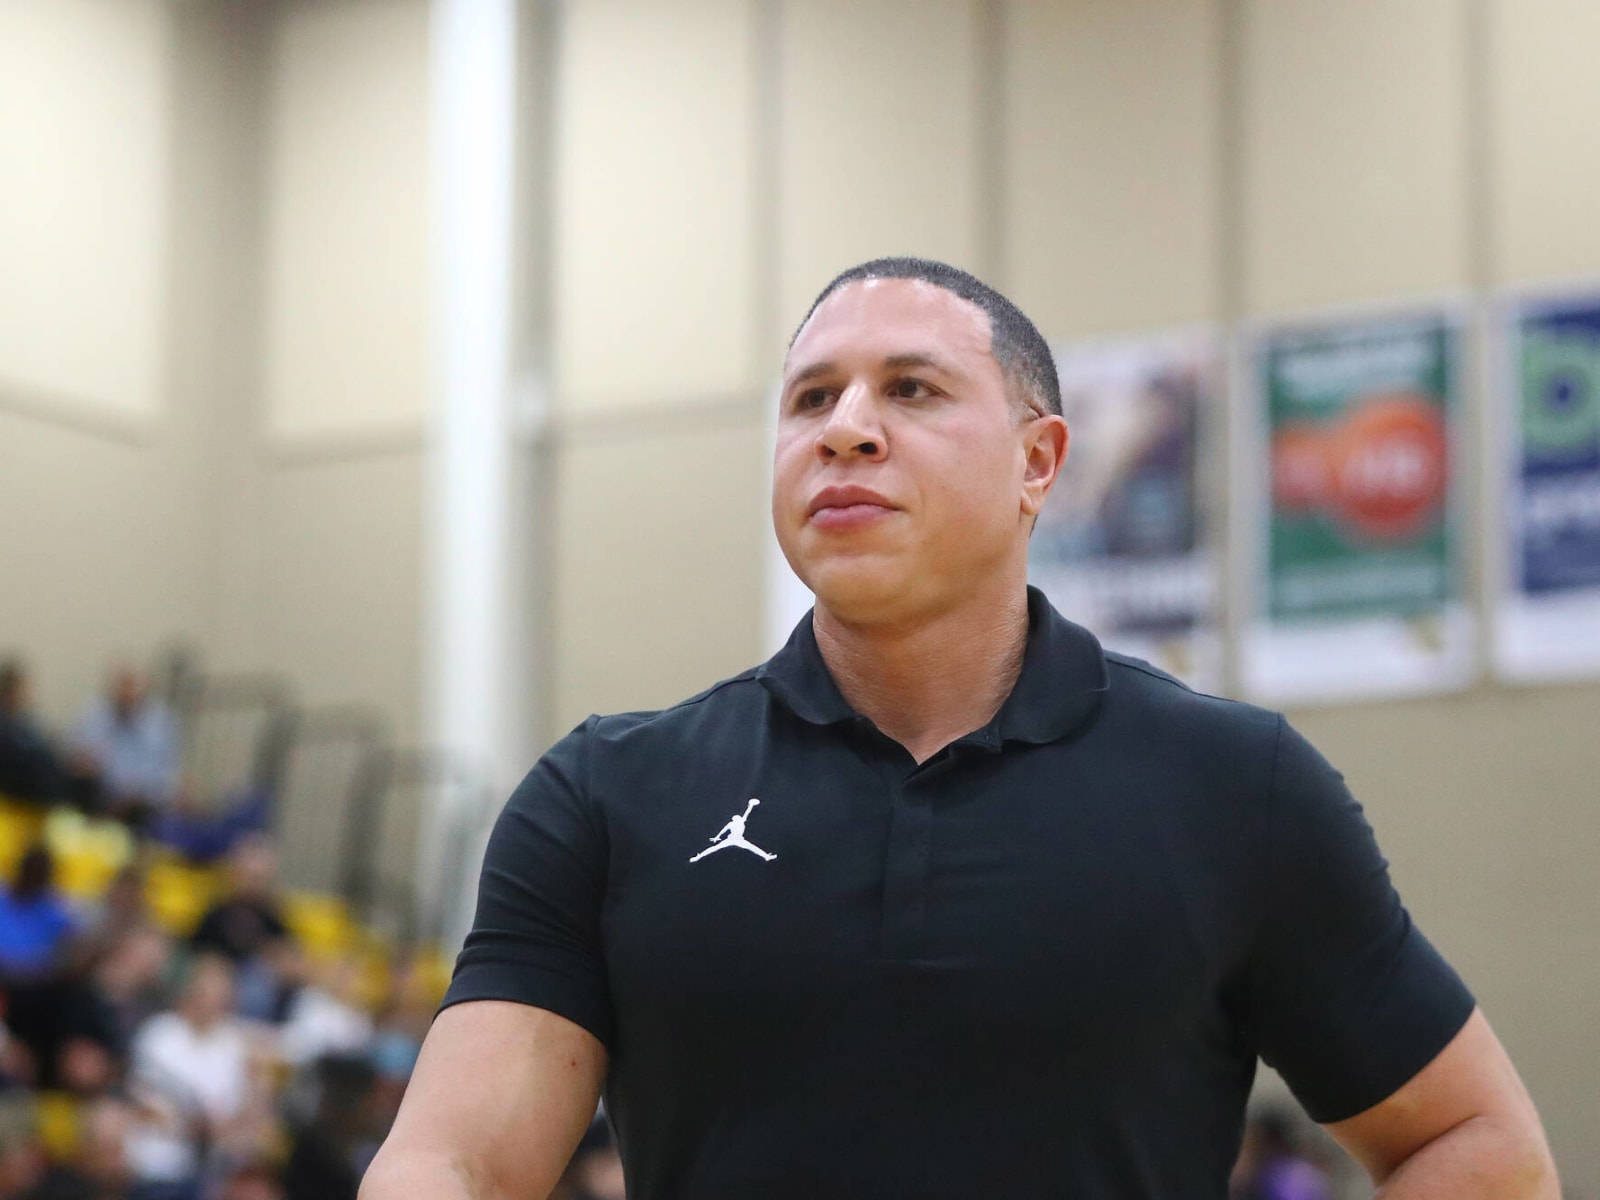 Mike Bibby makes list of top-selling NBA jerseys in Alabama